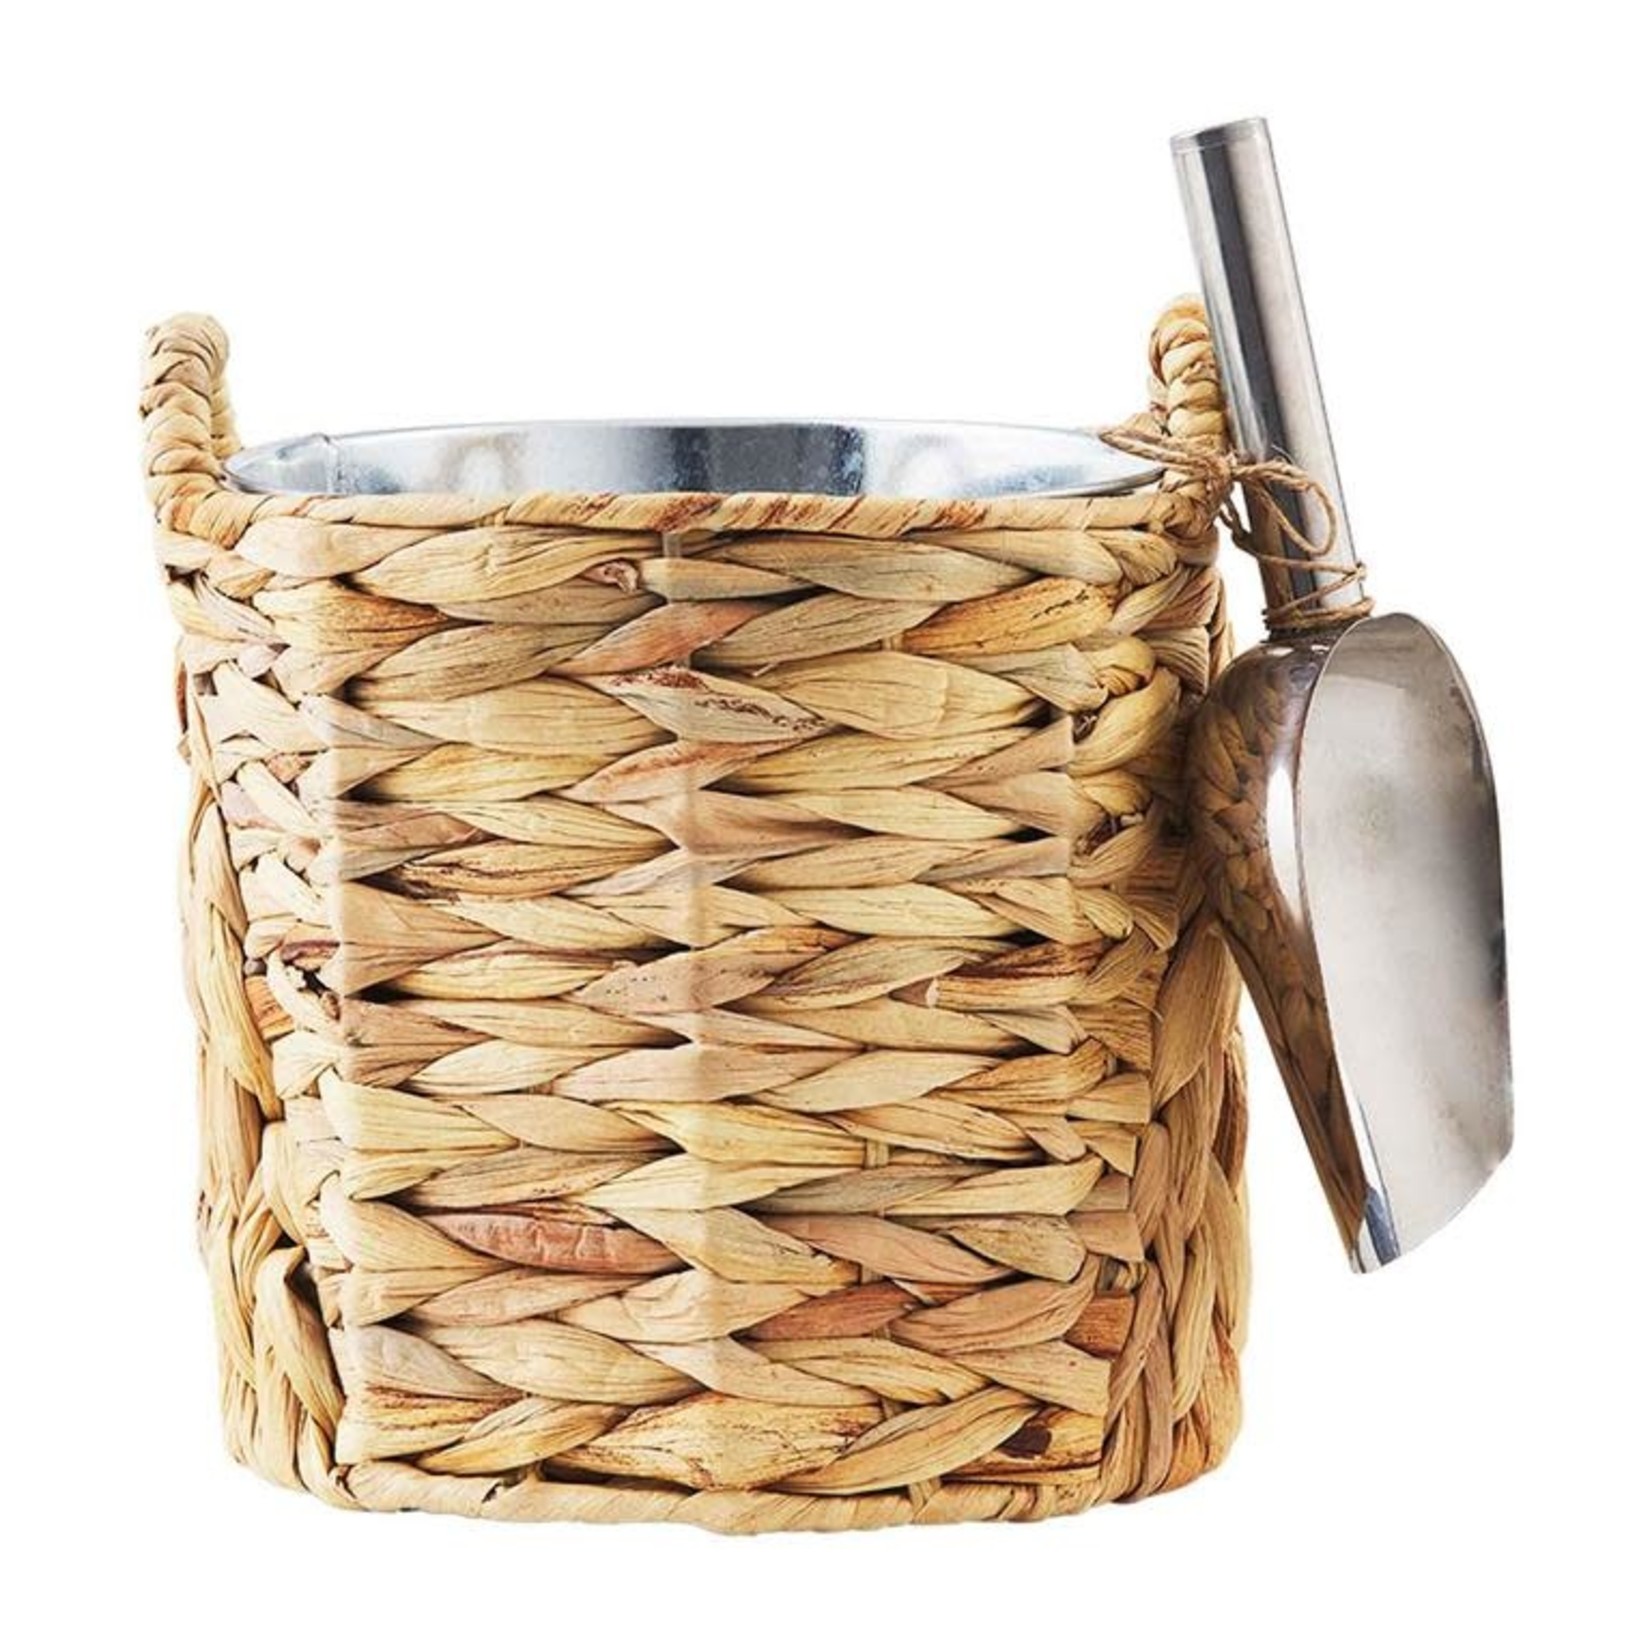 Outside The Box 8" Tin Bucket In Water Hyacinth Basket With Scoop Set